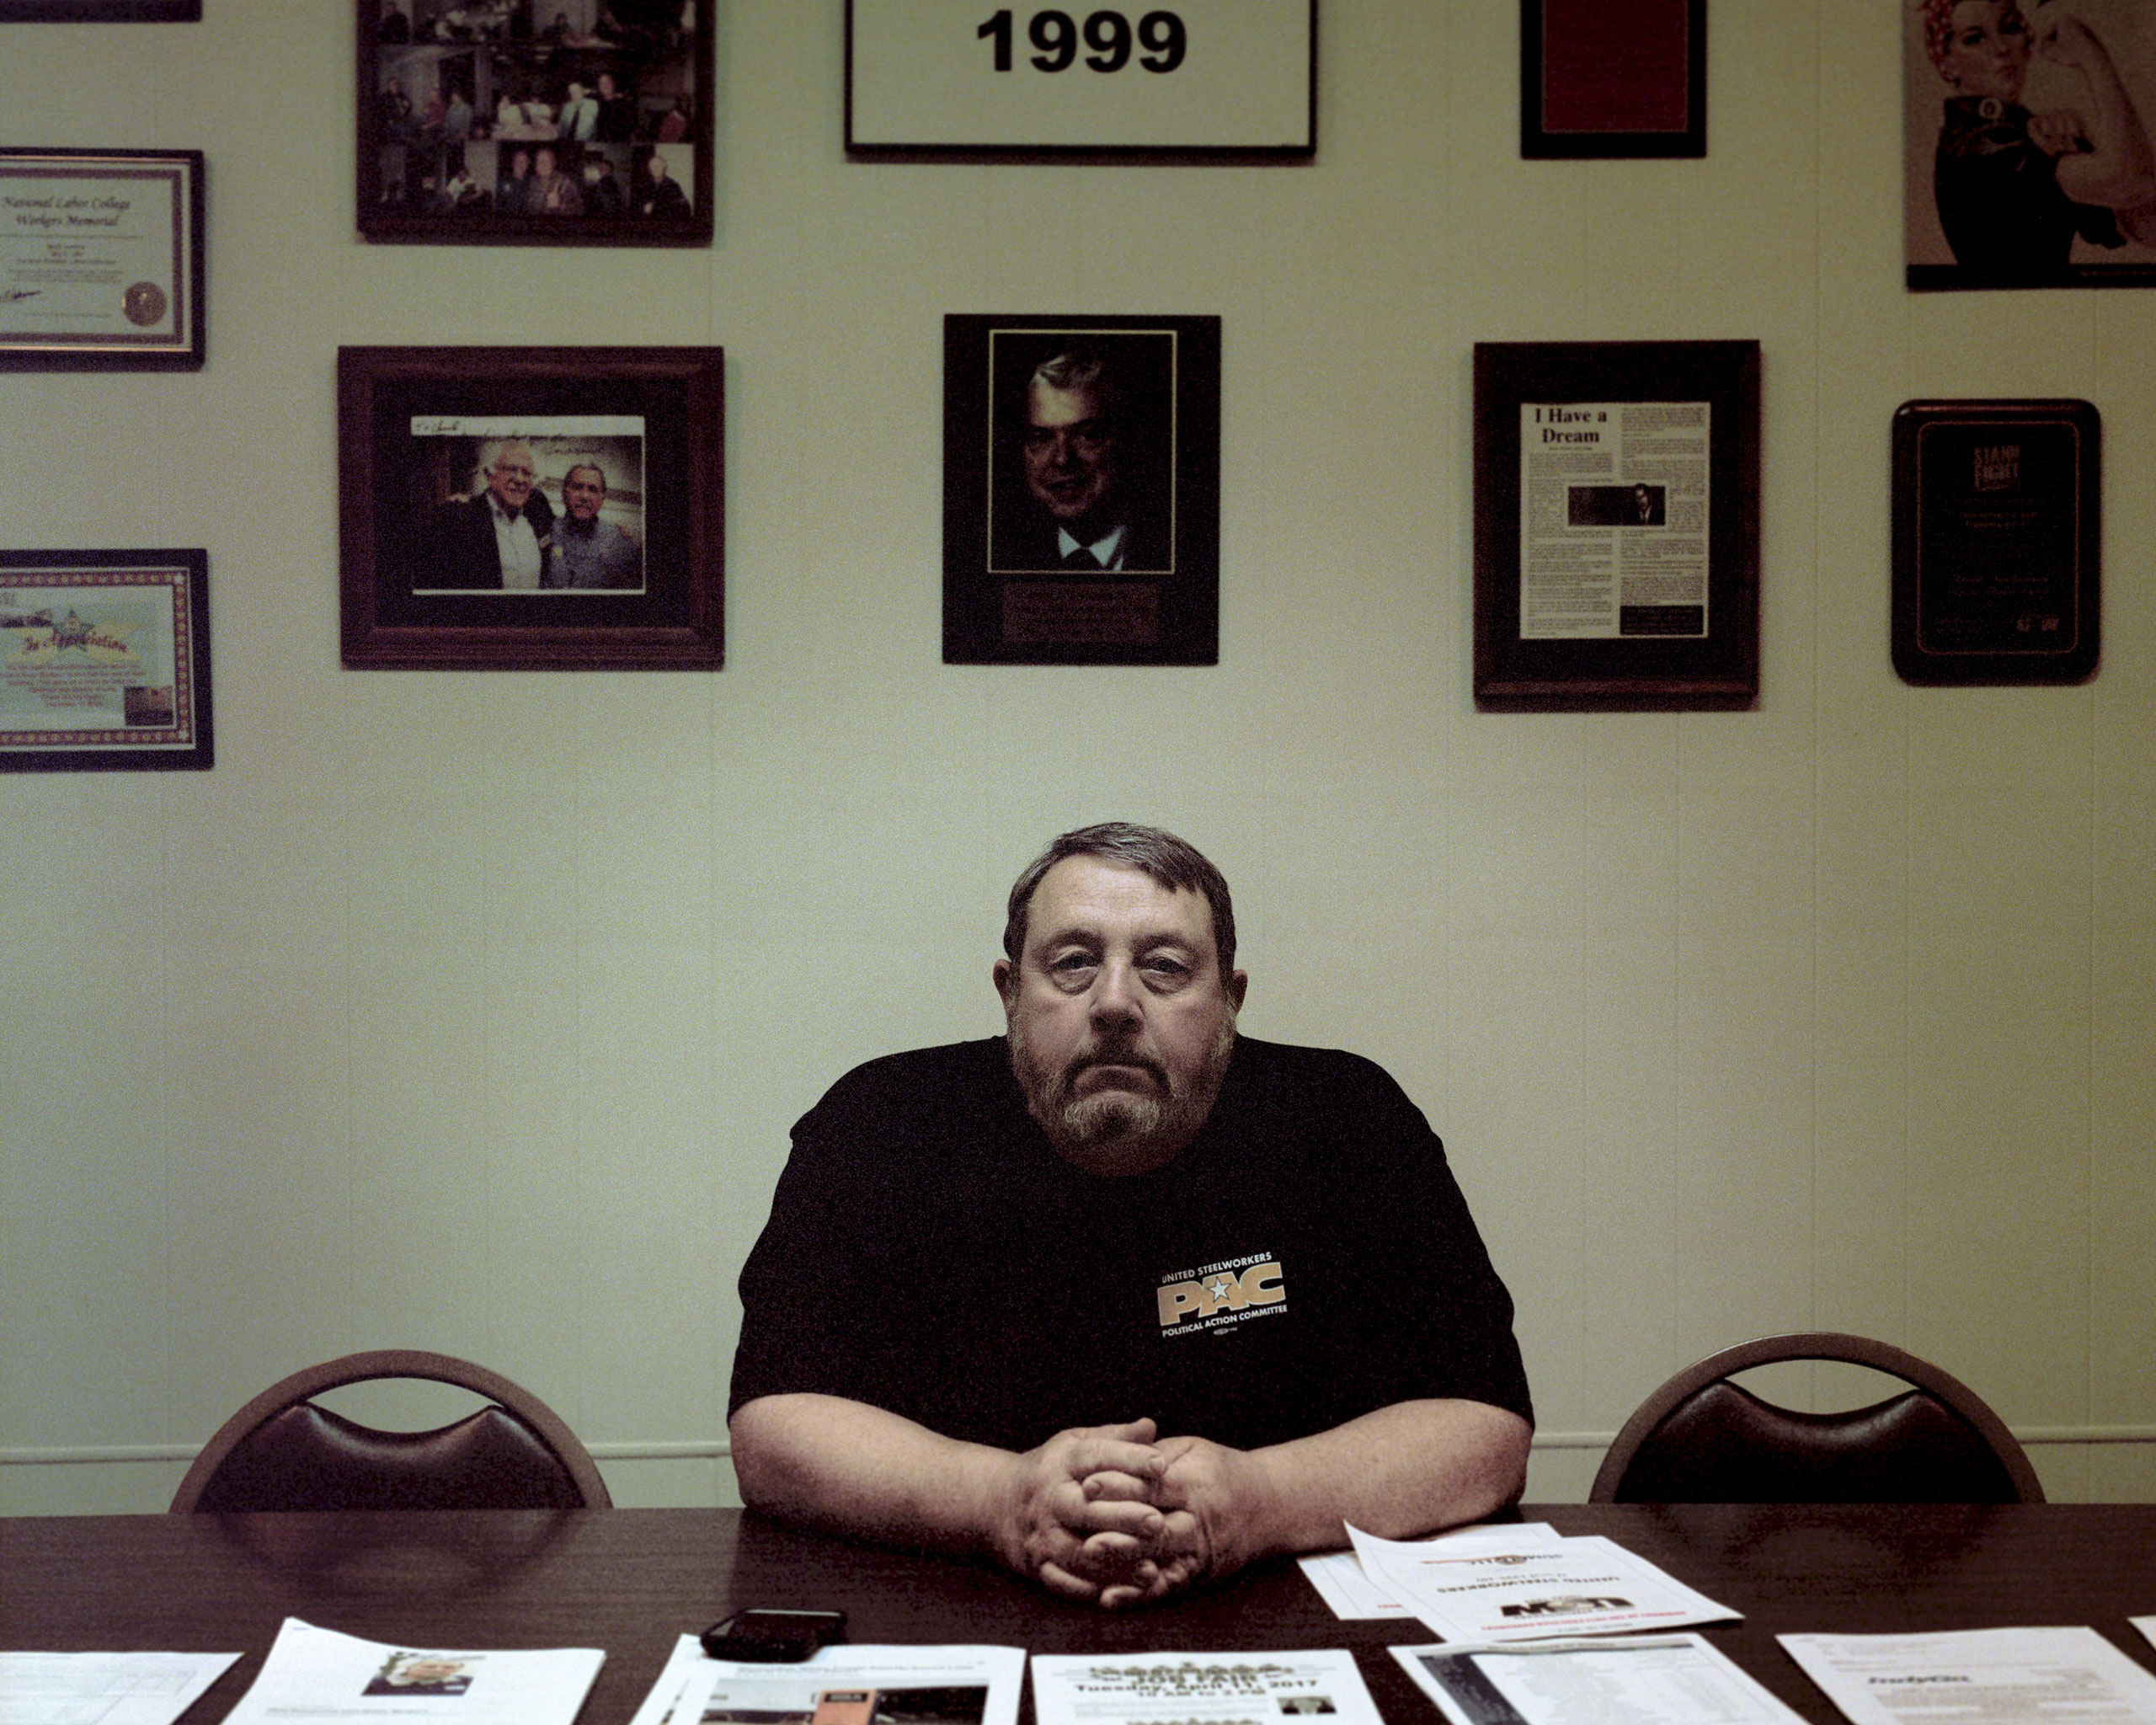 Don Zering, Rexnord’s union rep, at the United Steelworkers Local 1999; he’s worked at the company for 44 years (Inzajeano Latif for TIME)